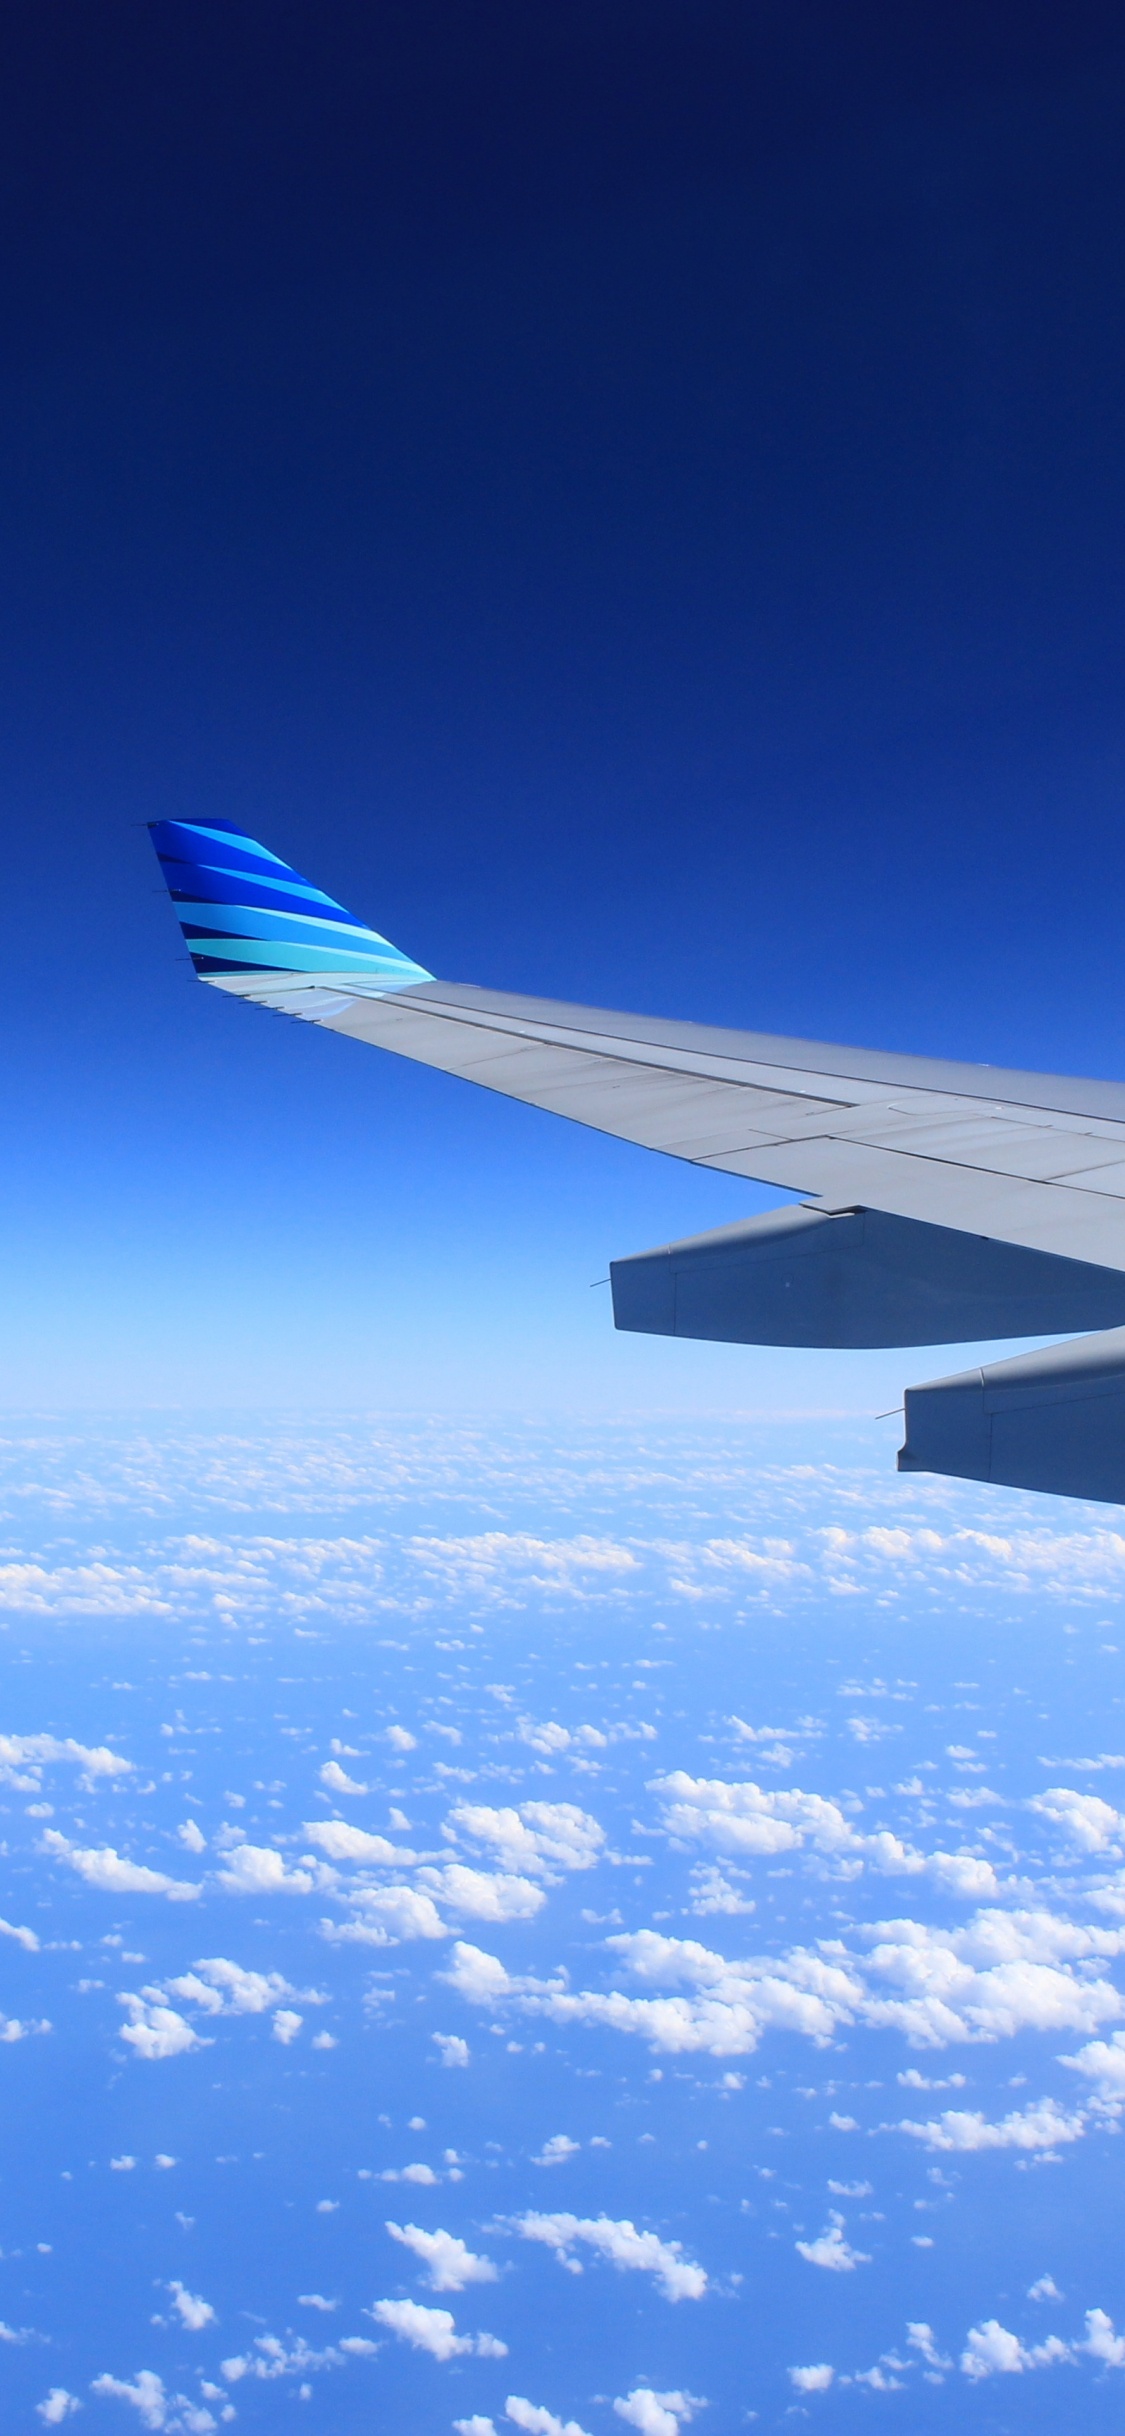 White and Blue Airplane Wing Under Blue Sky During Daytime. Wallpaper in 1125x2436 Resolution